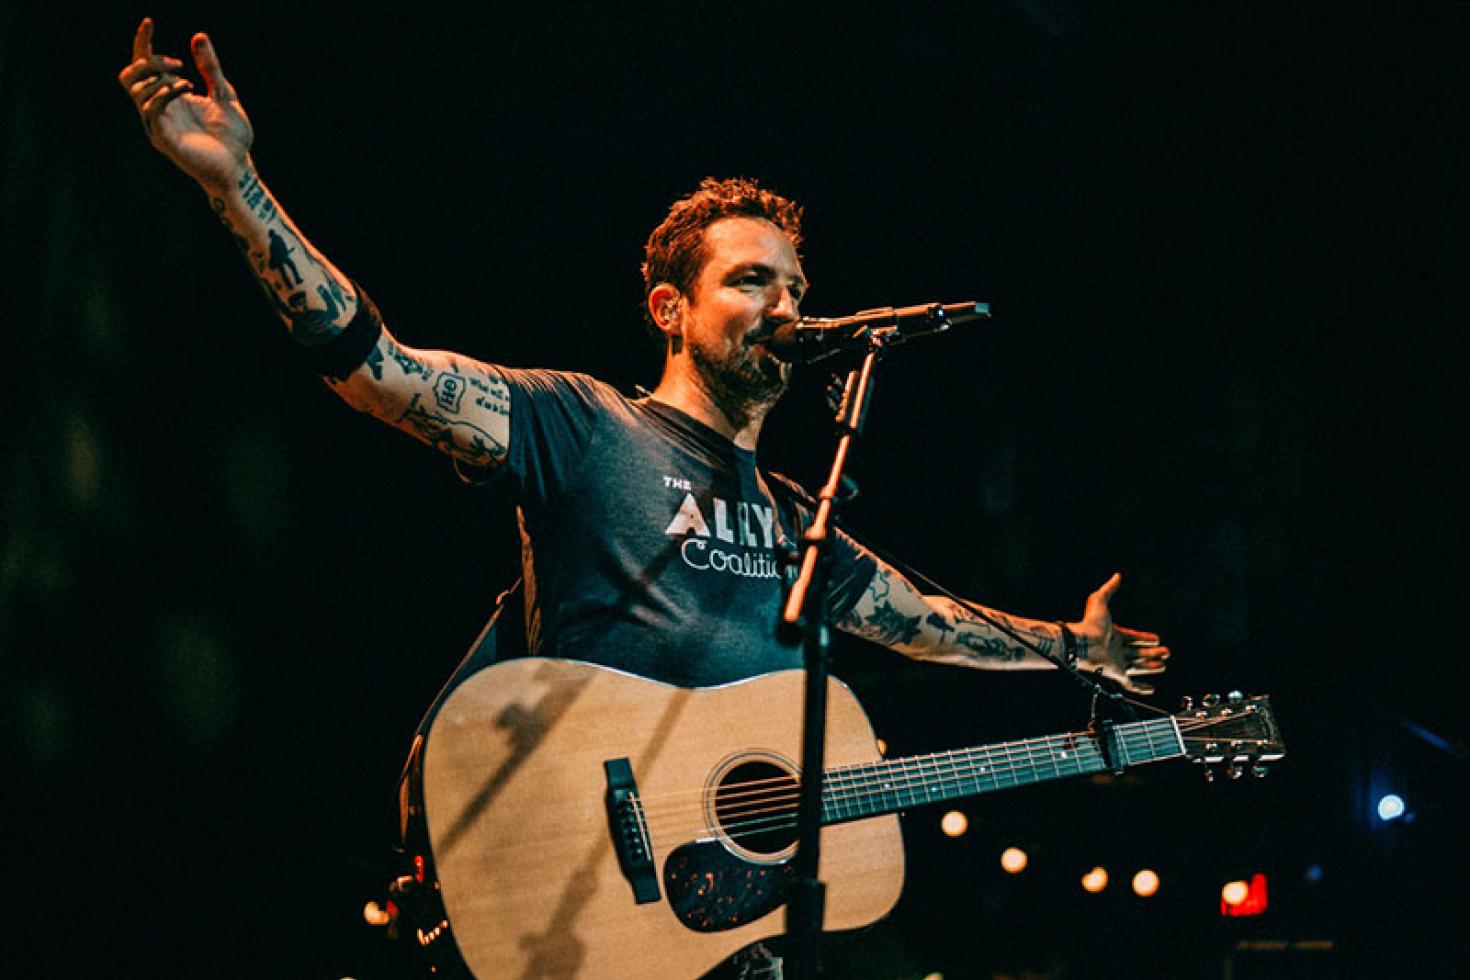 Frank Turner to attempt the world record for most shows played in different cities in 24 hours